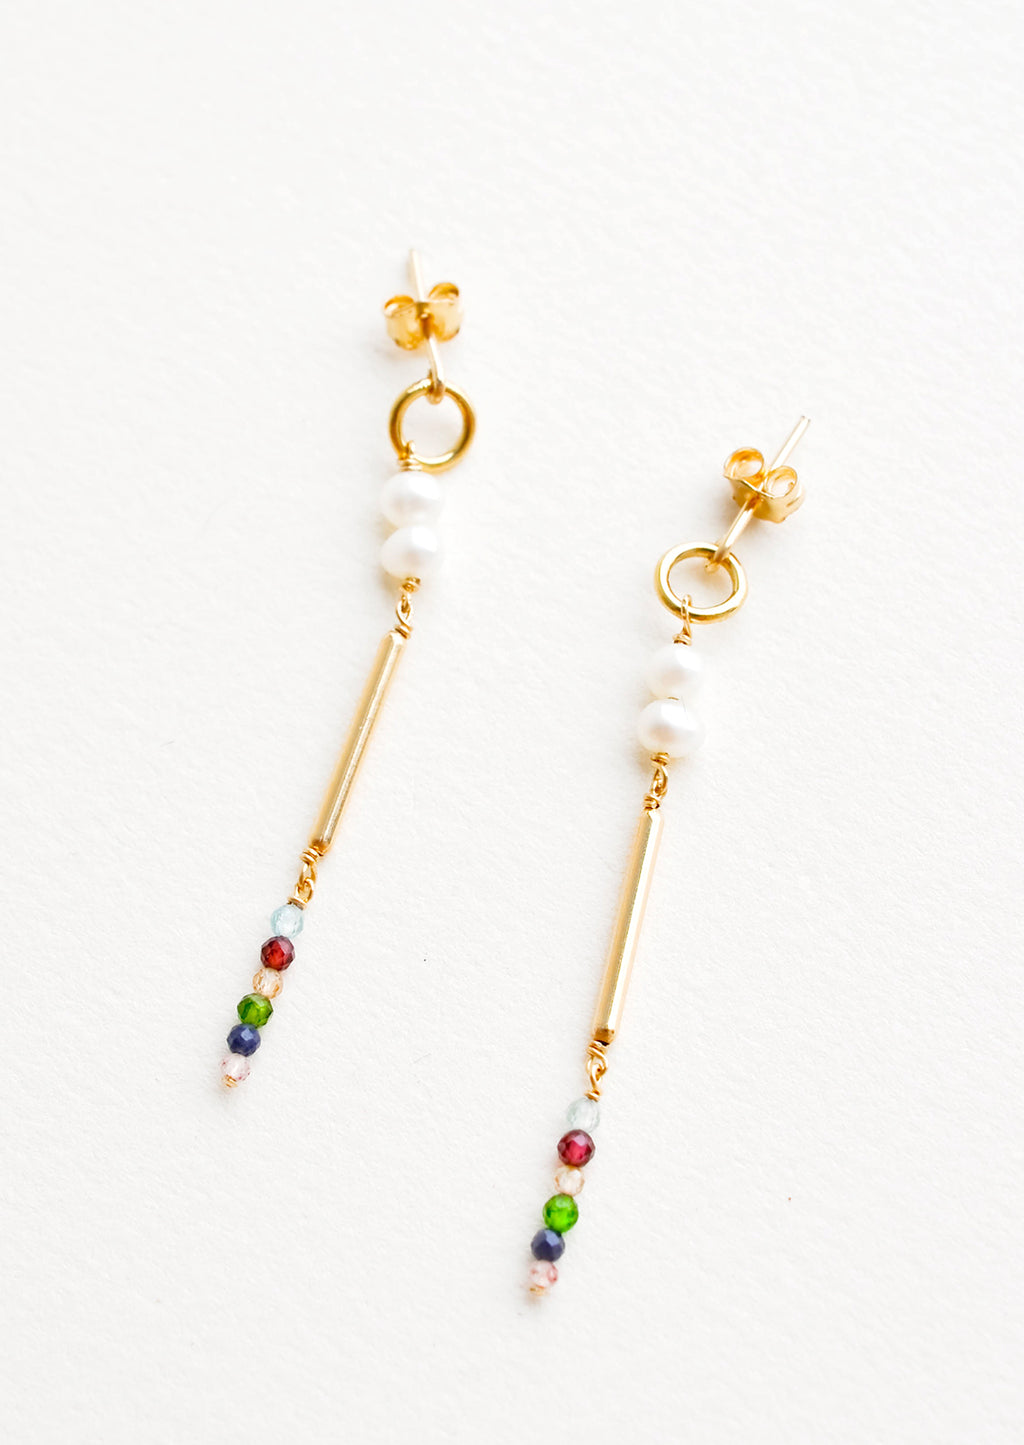 1: Dangling earrings featuring a small circle, two pearl beads, a gold post and six small multicolor gemstones on a yellow gold post back.